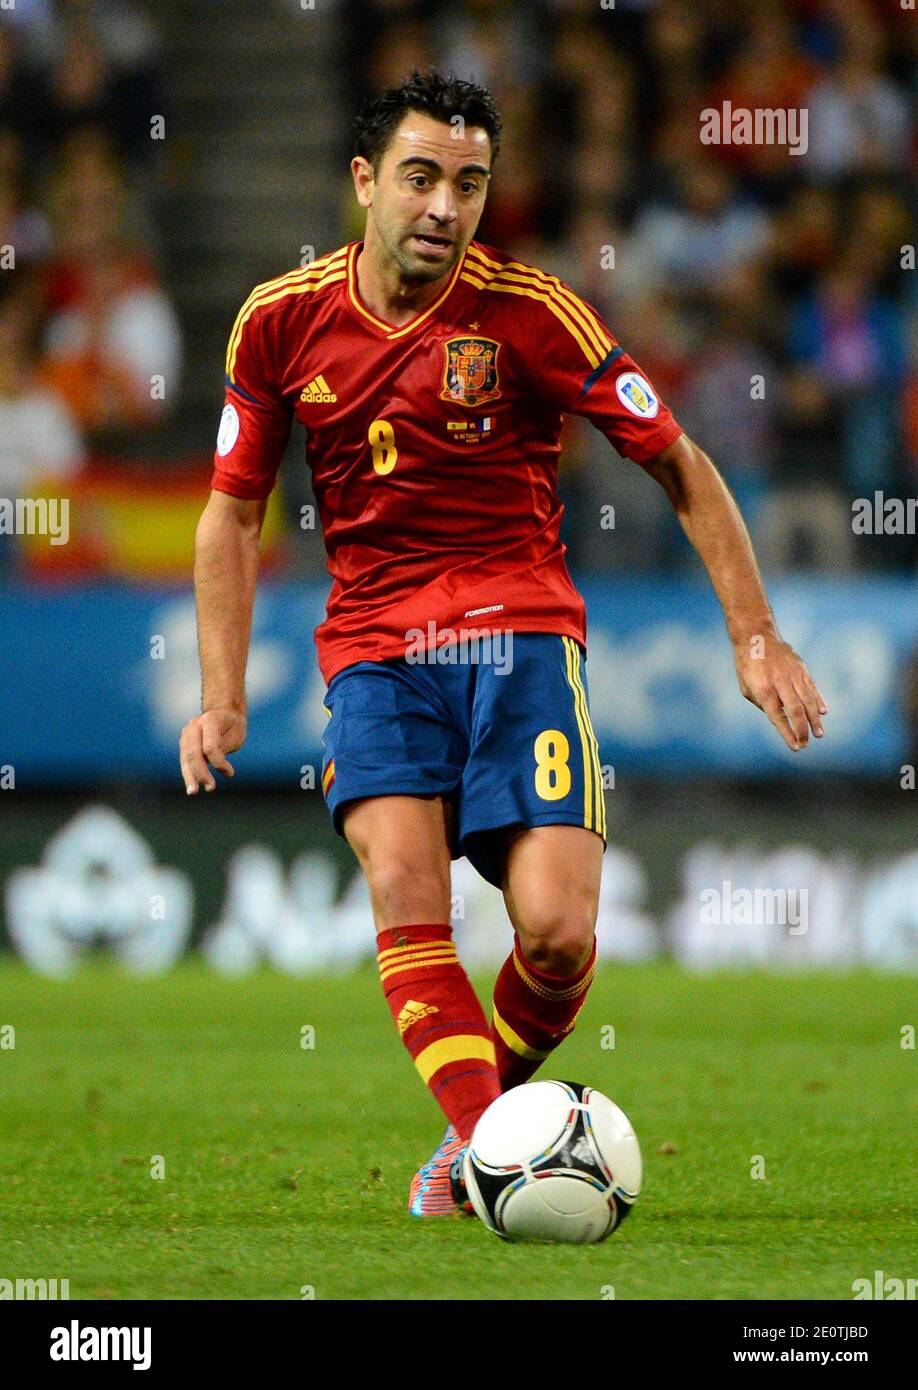 France's Xavi Hernandez during the World Cup 2014 qualifying soccer match, Spain Vs France at Vicente Calderon stadium in Madrid, Spain on October 16, 2012. The match ended in a 1-1 draw. Photo by Christian Liewig/ABACAPRESS.COM Stock Photo